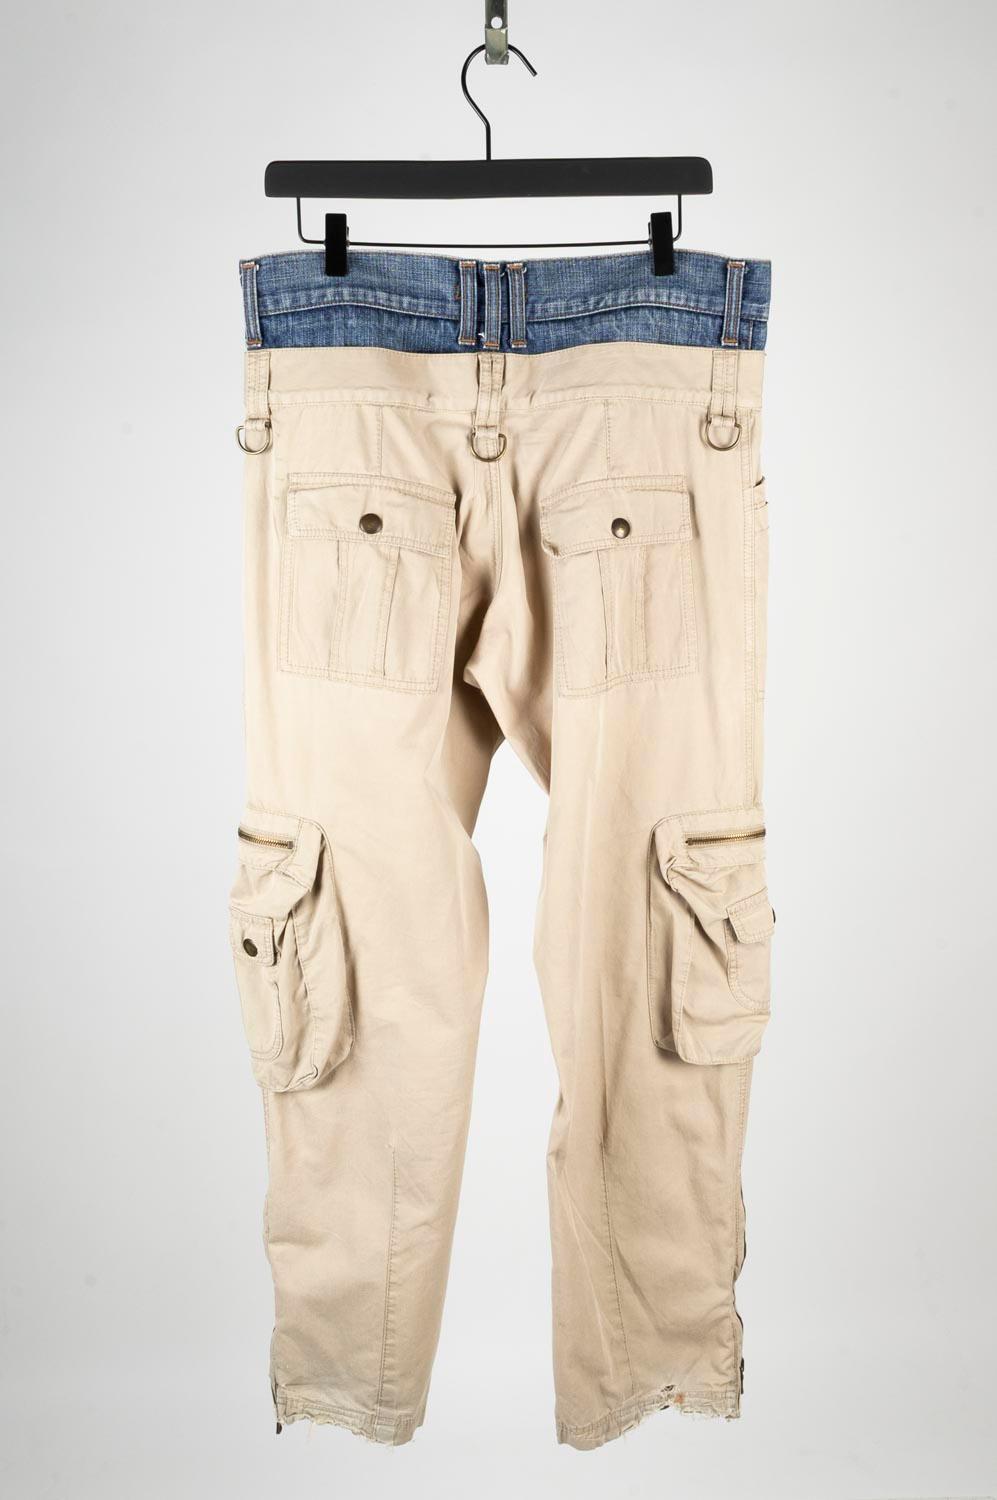 Vintage Dolce&Gabbana Men Cargo Pants Trousers Main Line Size ITA46 (Medium) In Good Condition For Sale In Kaunas, LT